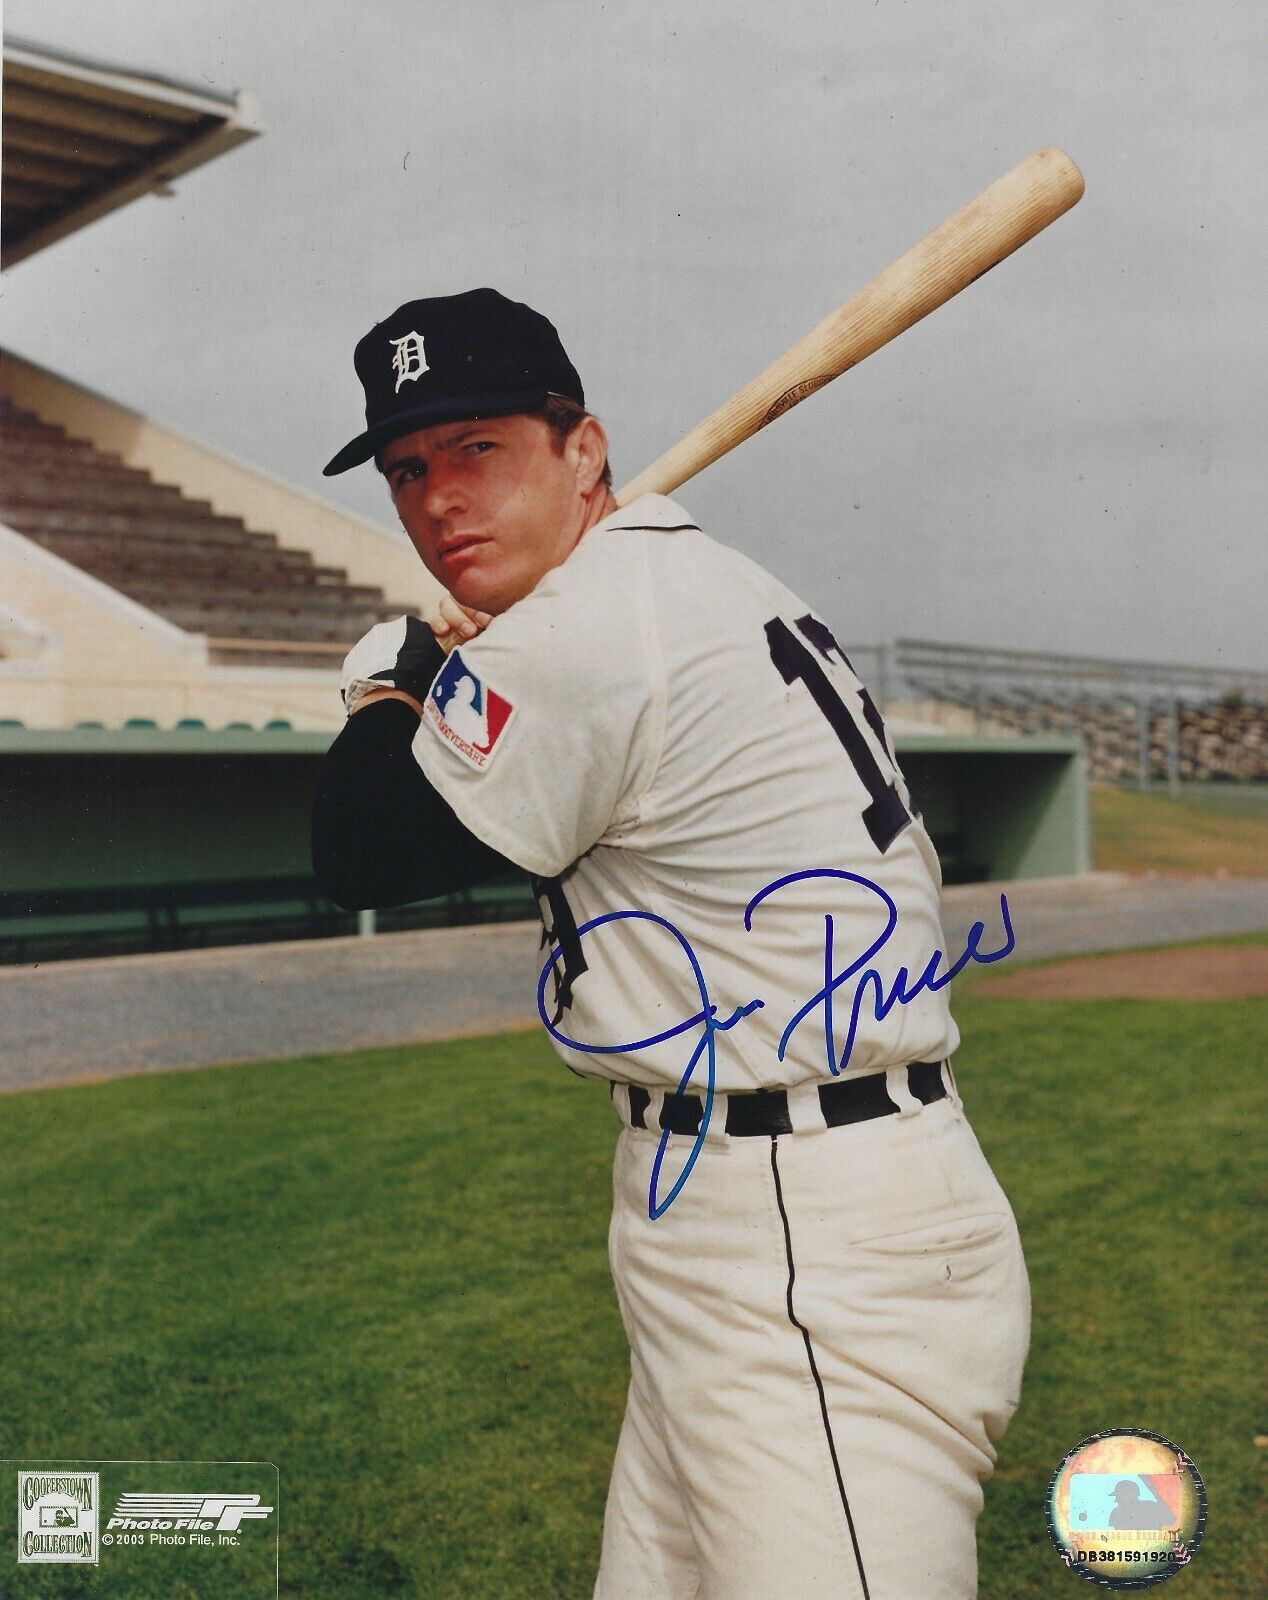 Signed 8x10 JIM PRICE Detroit Tigers Autographed Photo Poster painting - COA